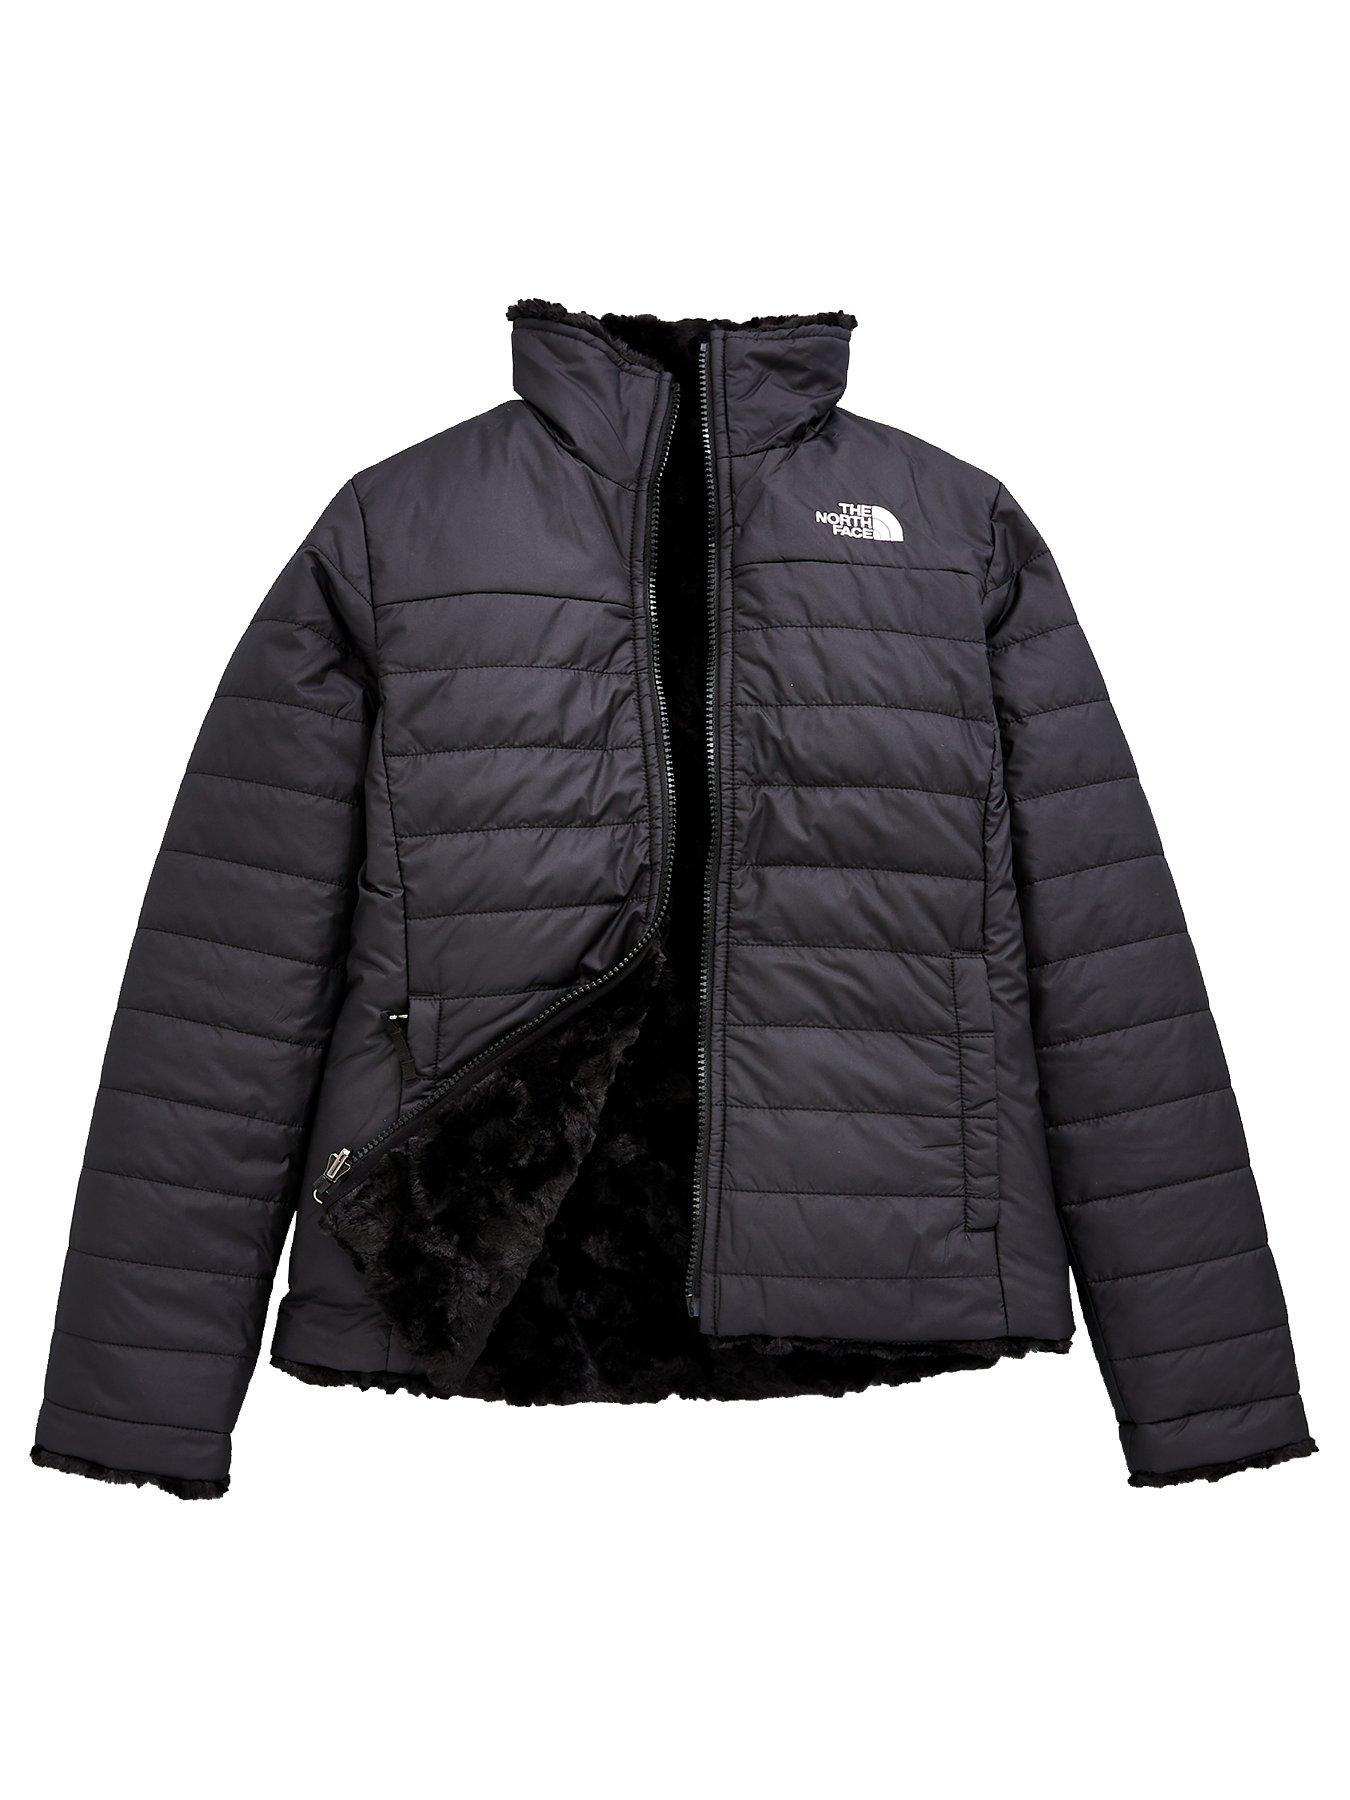 THE NORTH FACE Girls Reversible Mossbud 